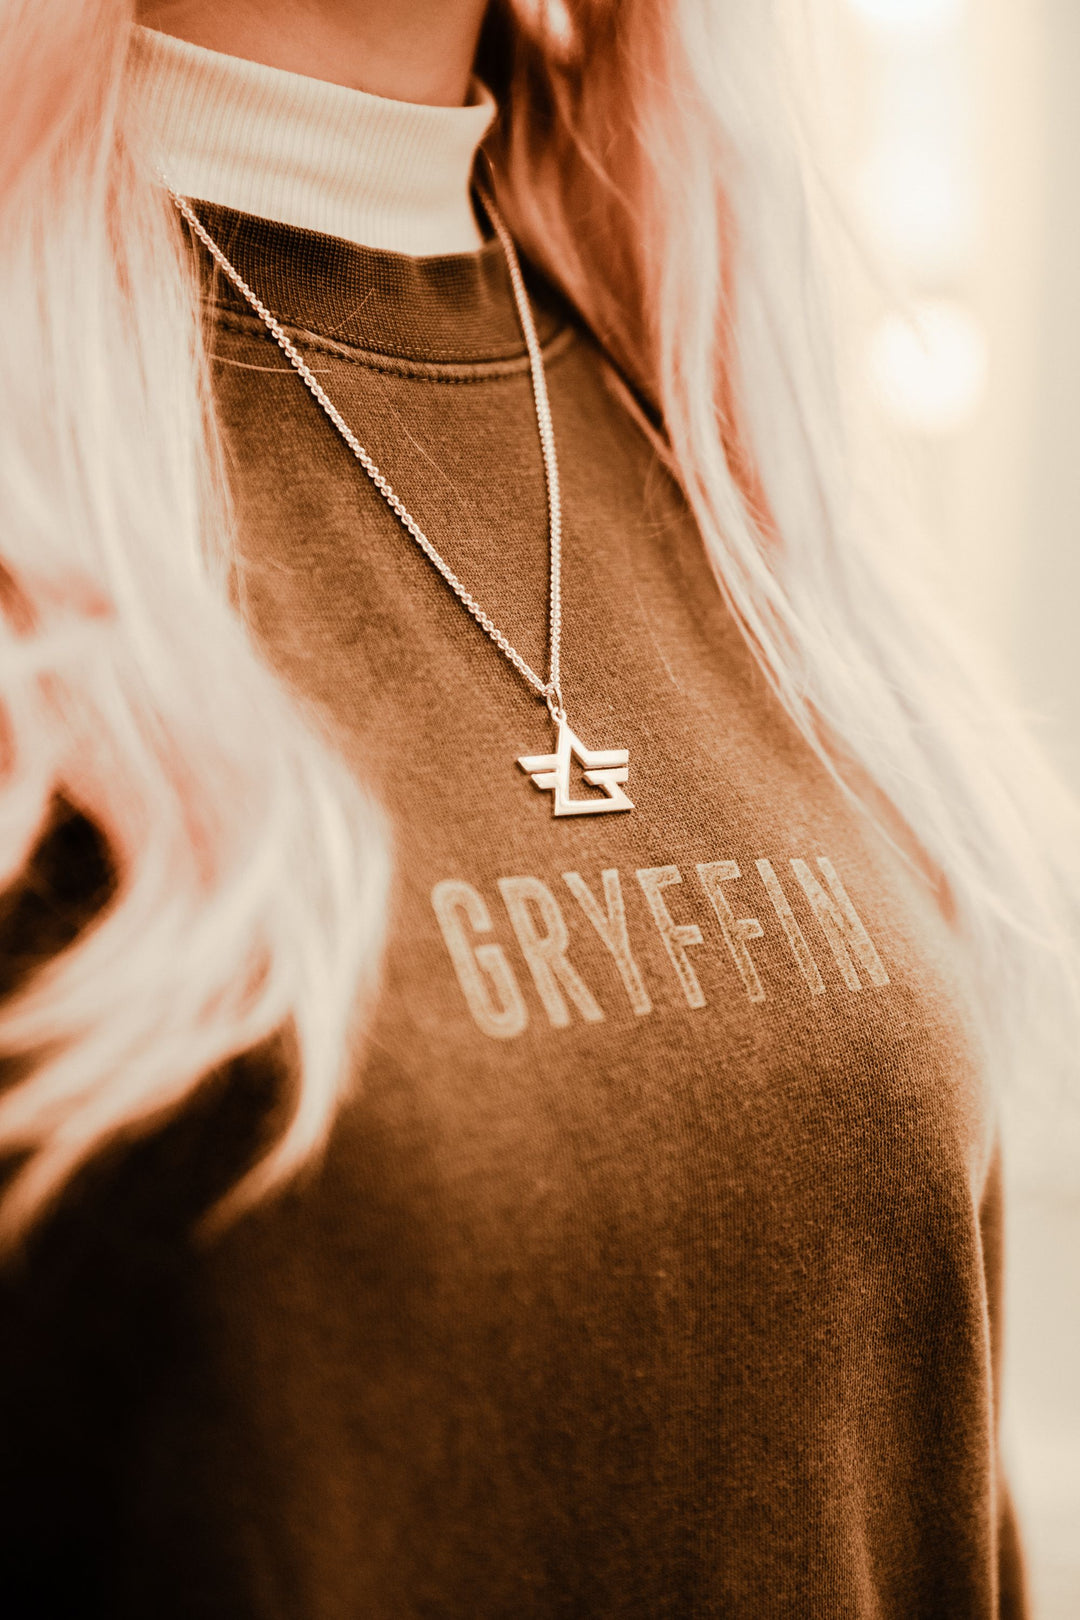 Gryffin Pendant Necklace